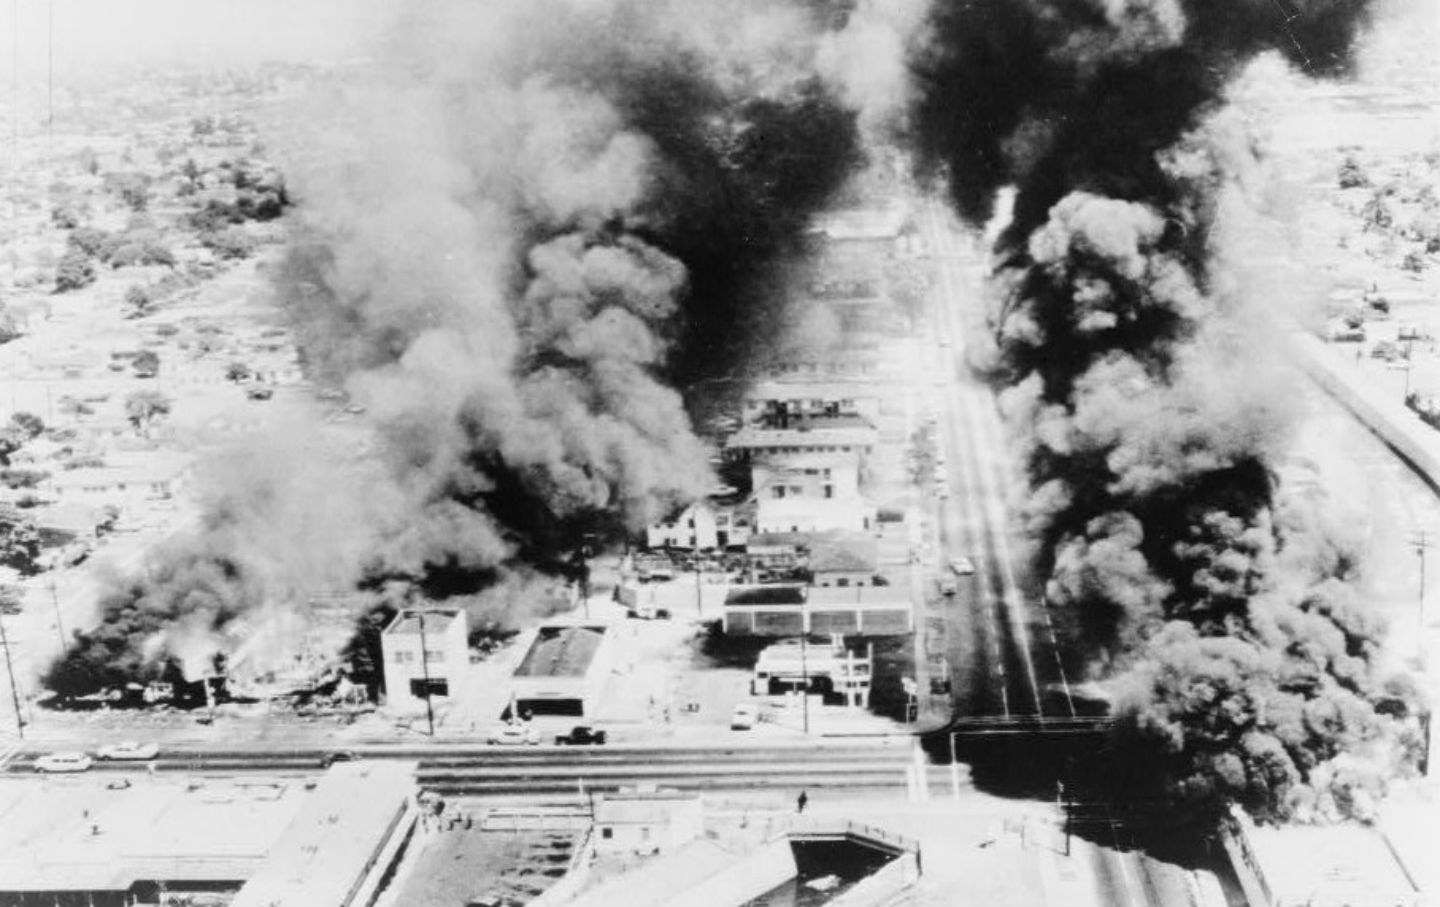 August 12, 1965: The Watts Section of Los Angeles Riots